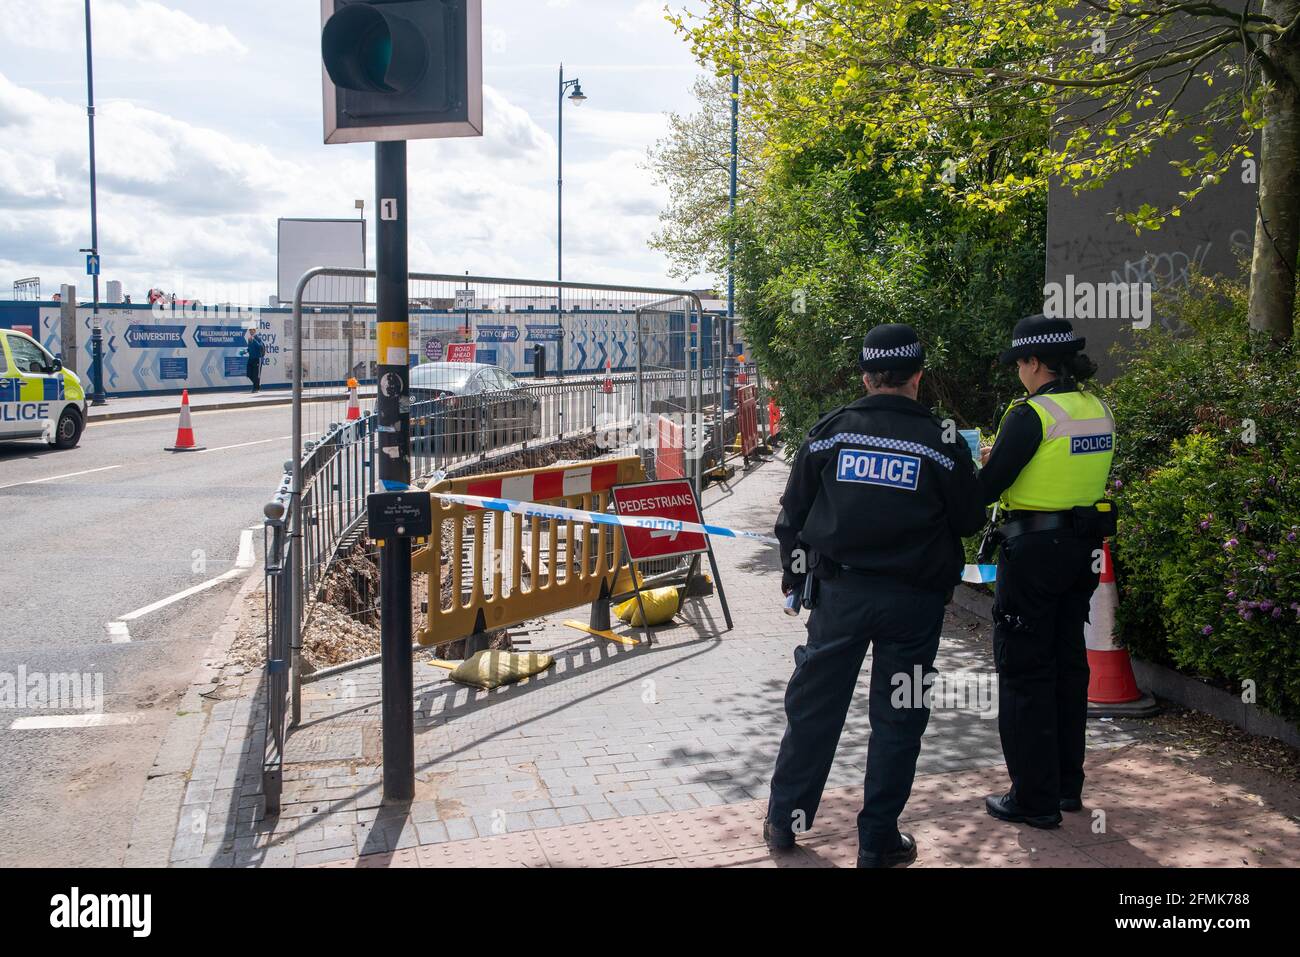 Birmingham, UK. 10th May 2021: West Midlands Police are investigating after human remains were discovered under a pavement by construction workers on Sunday morning (9th May 2021). Credit: Ryan Underwood / Alamy Live News Stock Photo